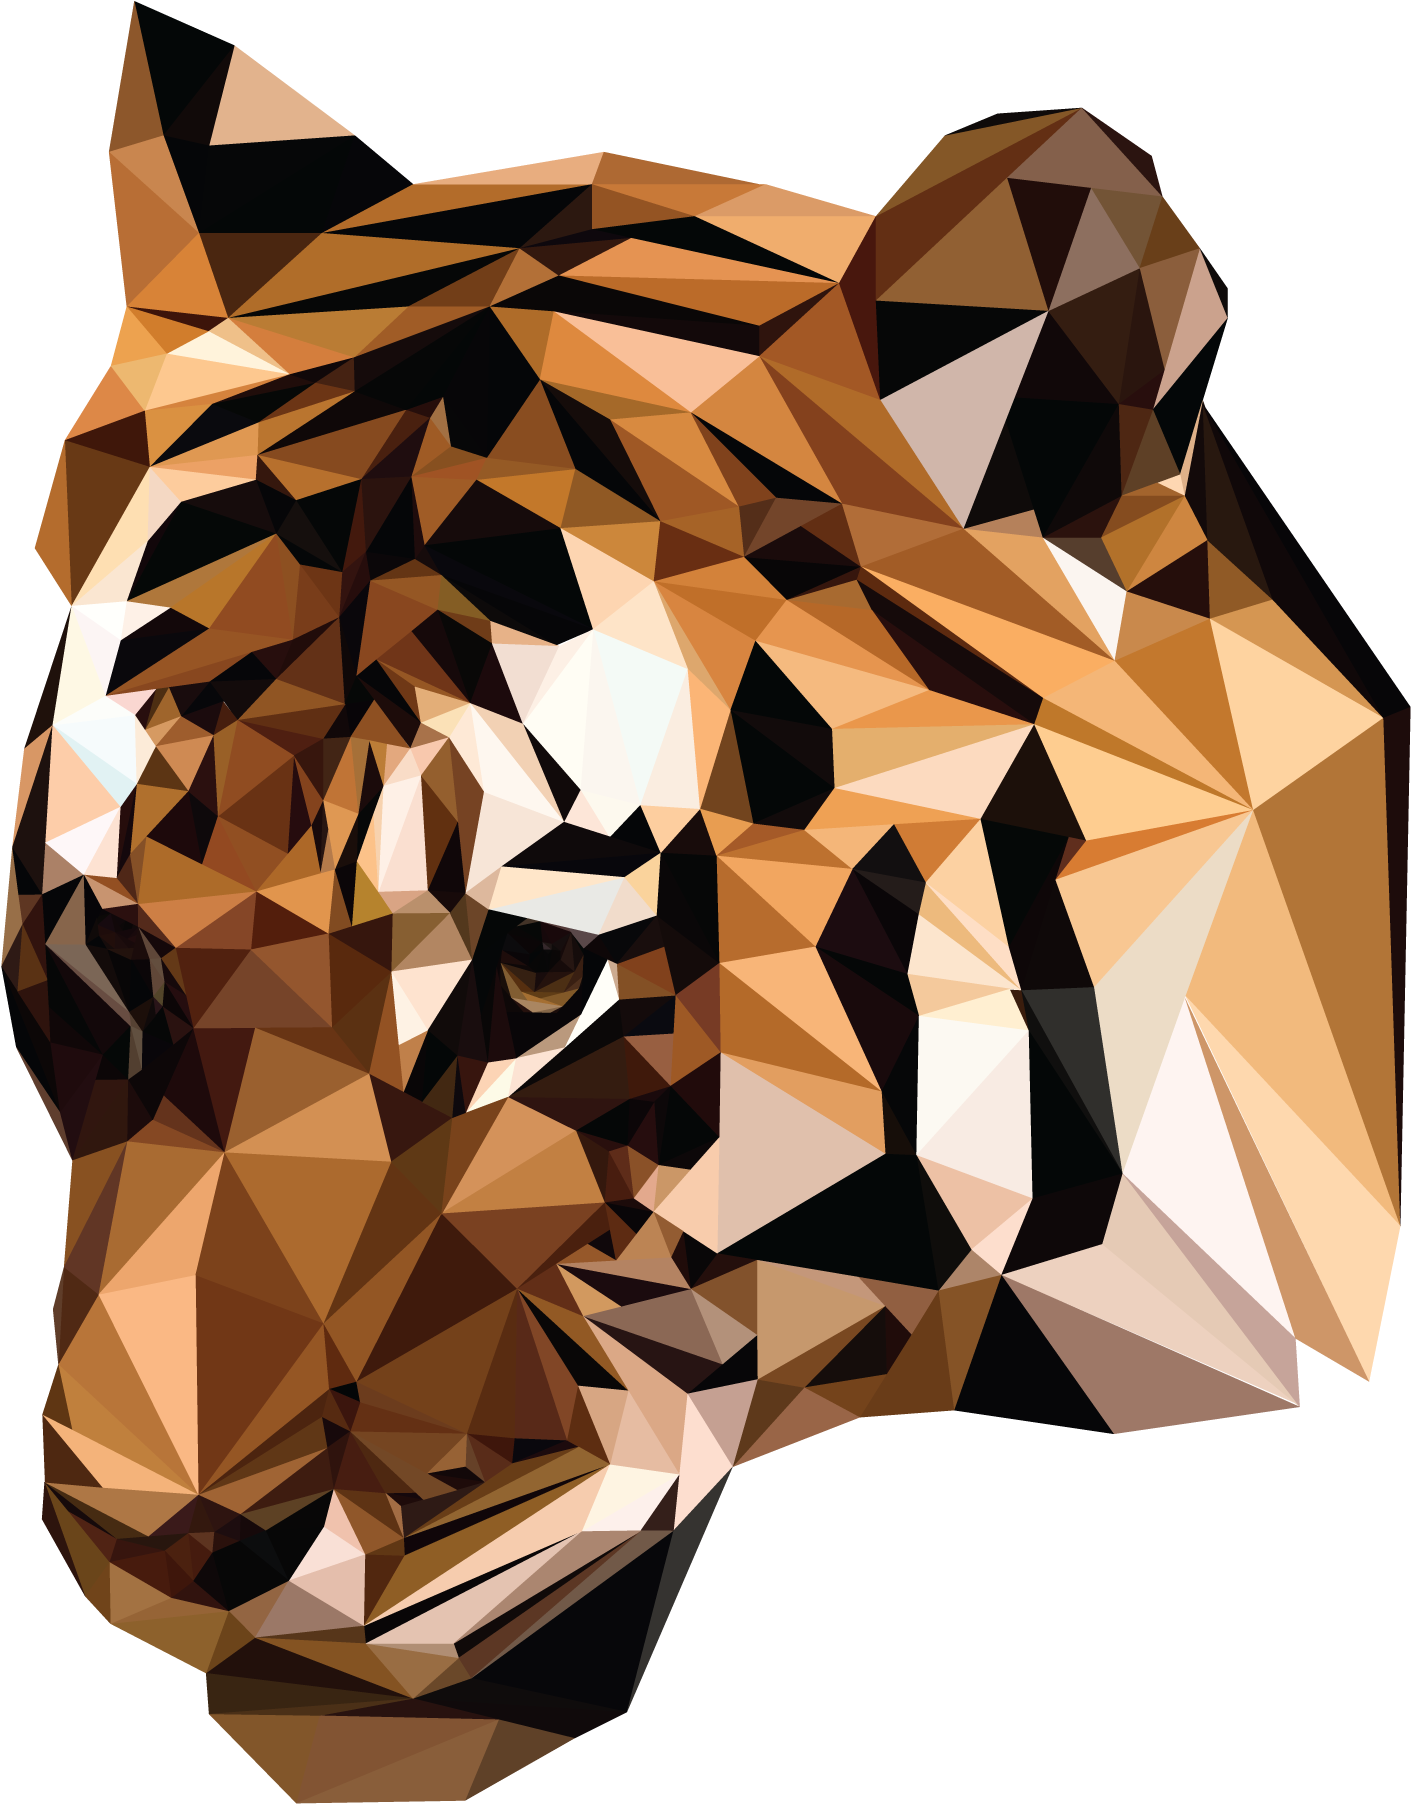 Tiger Polygongraphic Design - Polygon Tiger Png (2000x2000), Png Download